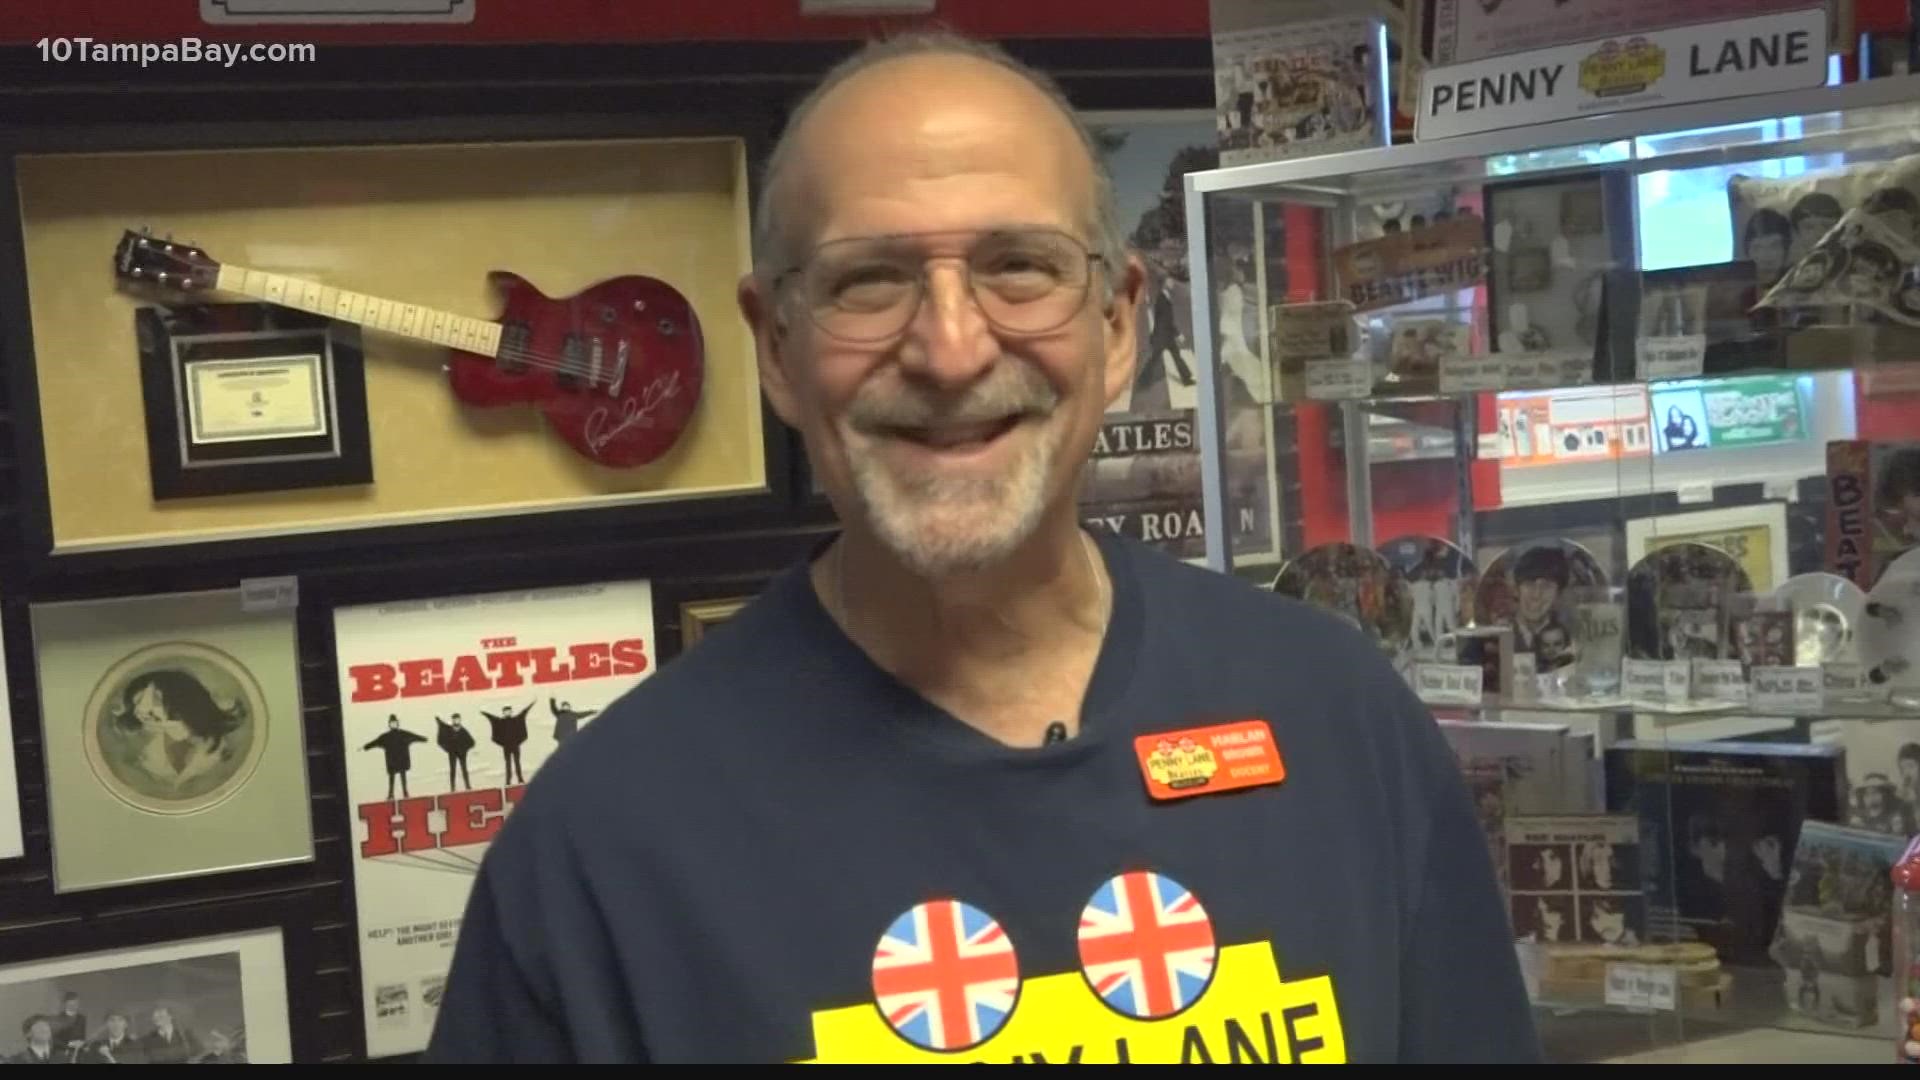 Dr. Robert Entel has amassed a huge Beatles collection but only a small portion fits inside the Penny Lane museum in Dunedin.